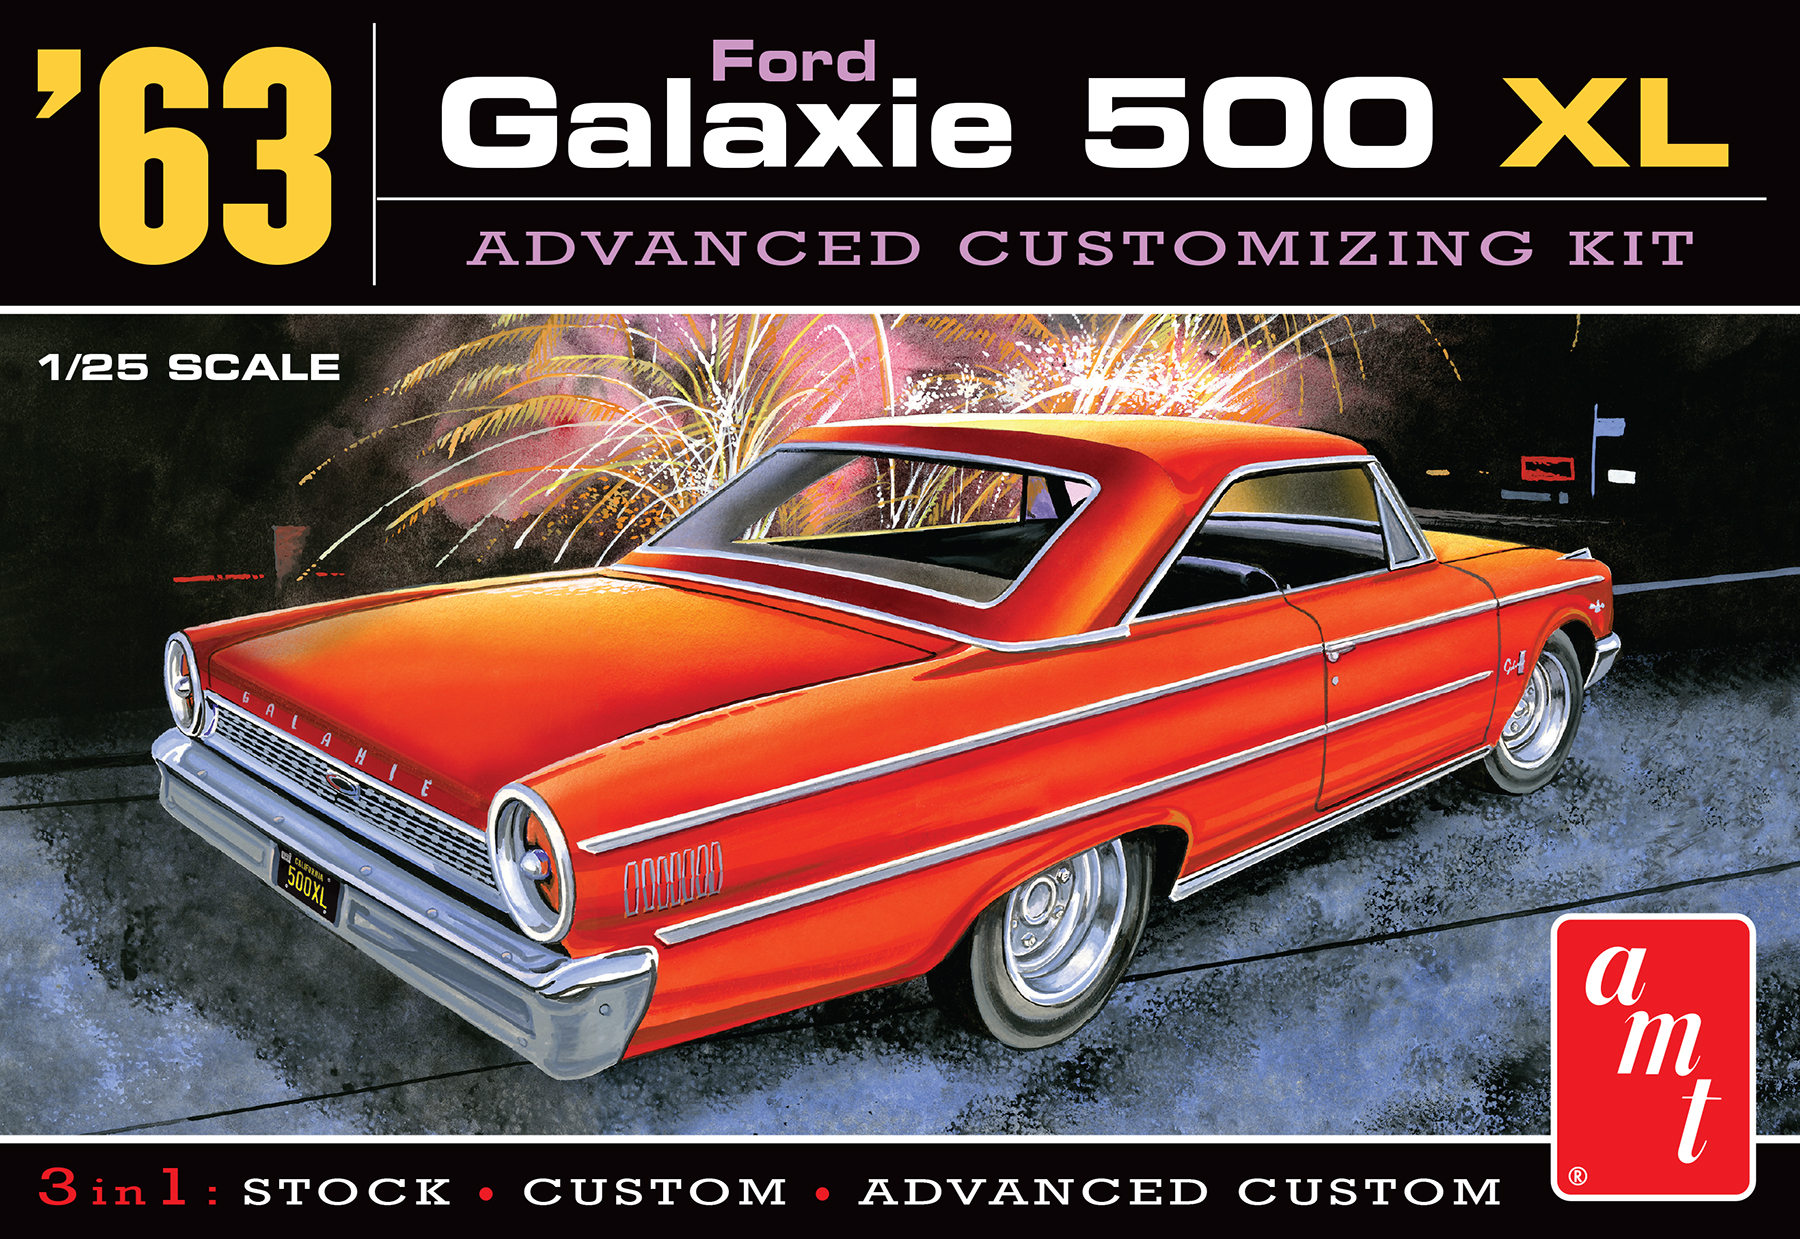 Ford Galaxie 500xl 1963 Amt Pa Gombotec Webshop